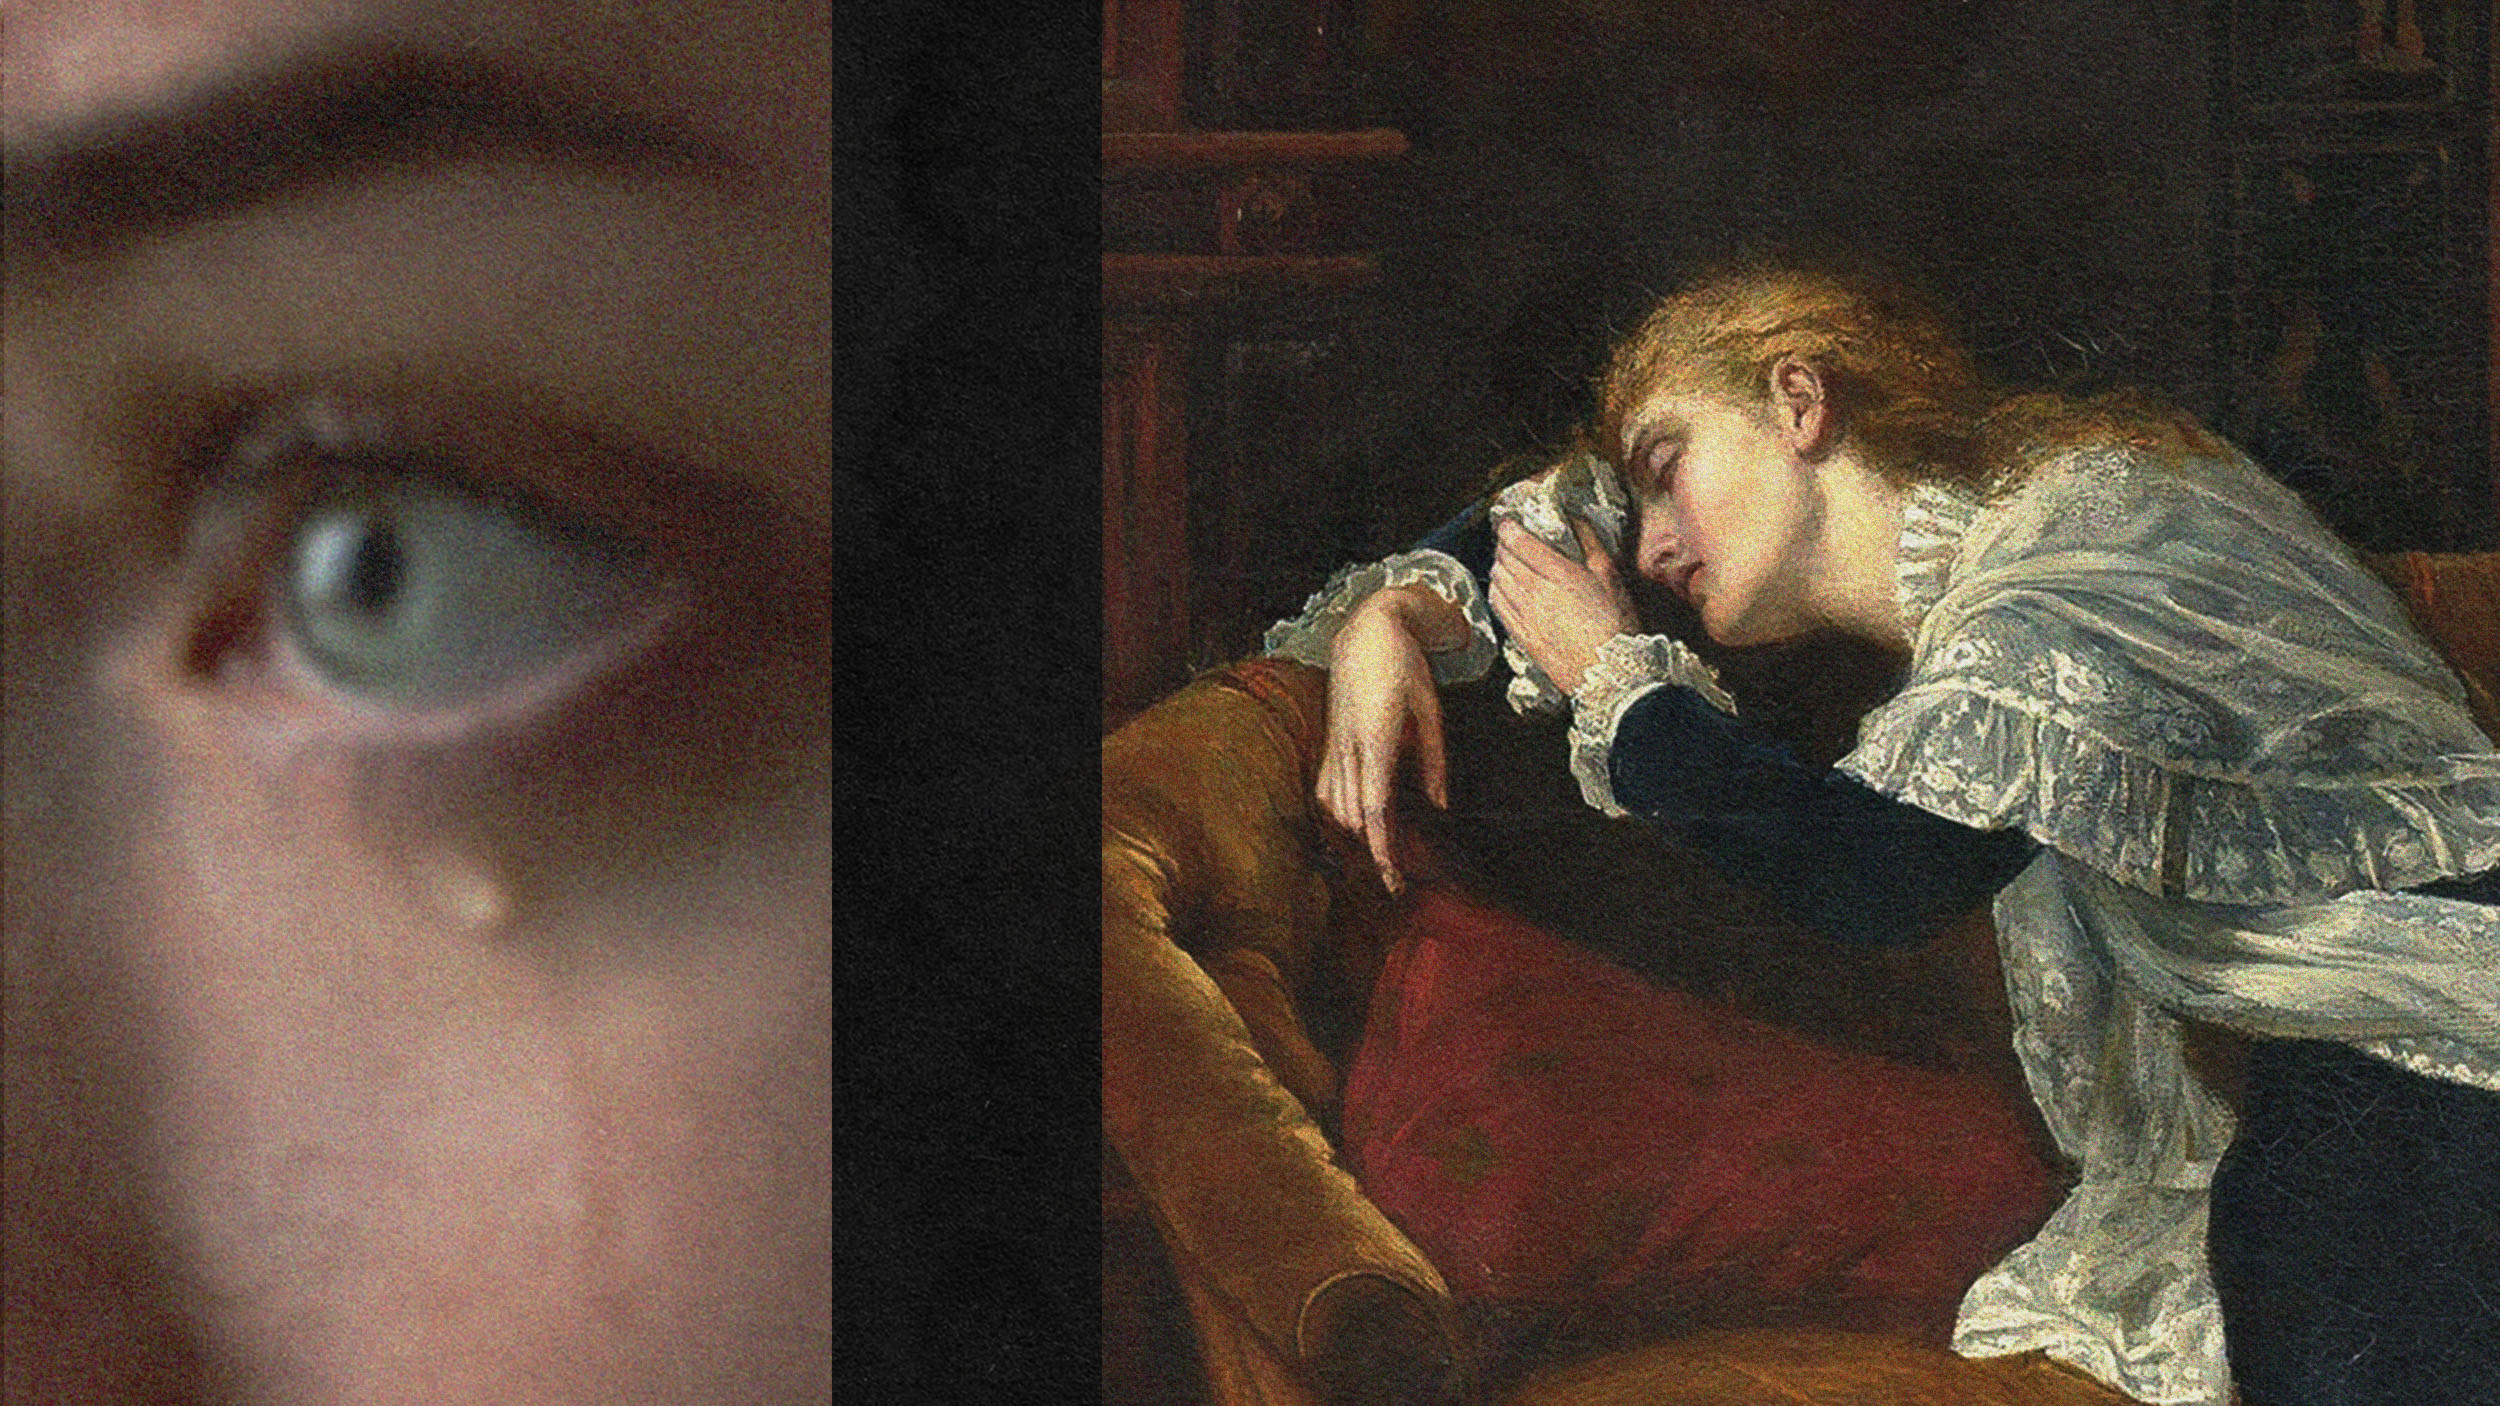 A split image with a close-up of a blue eye on the left, and a classical painting of a woman resting her head on her arm on a sofa on the right.